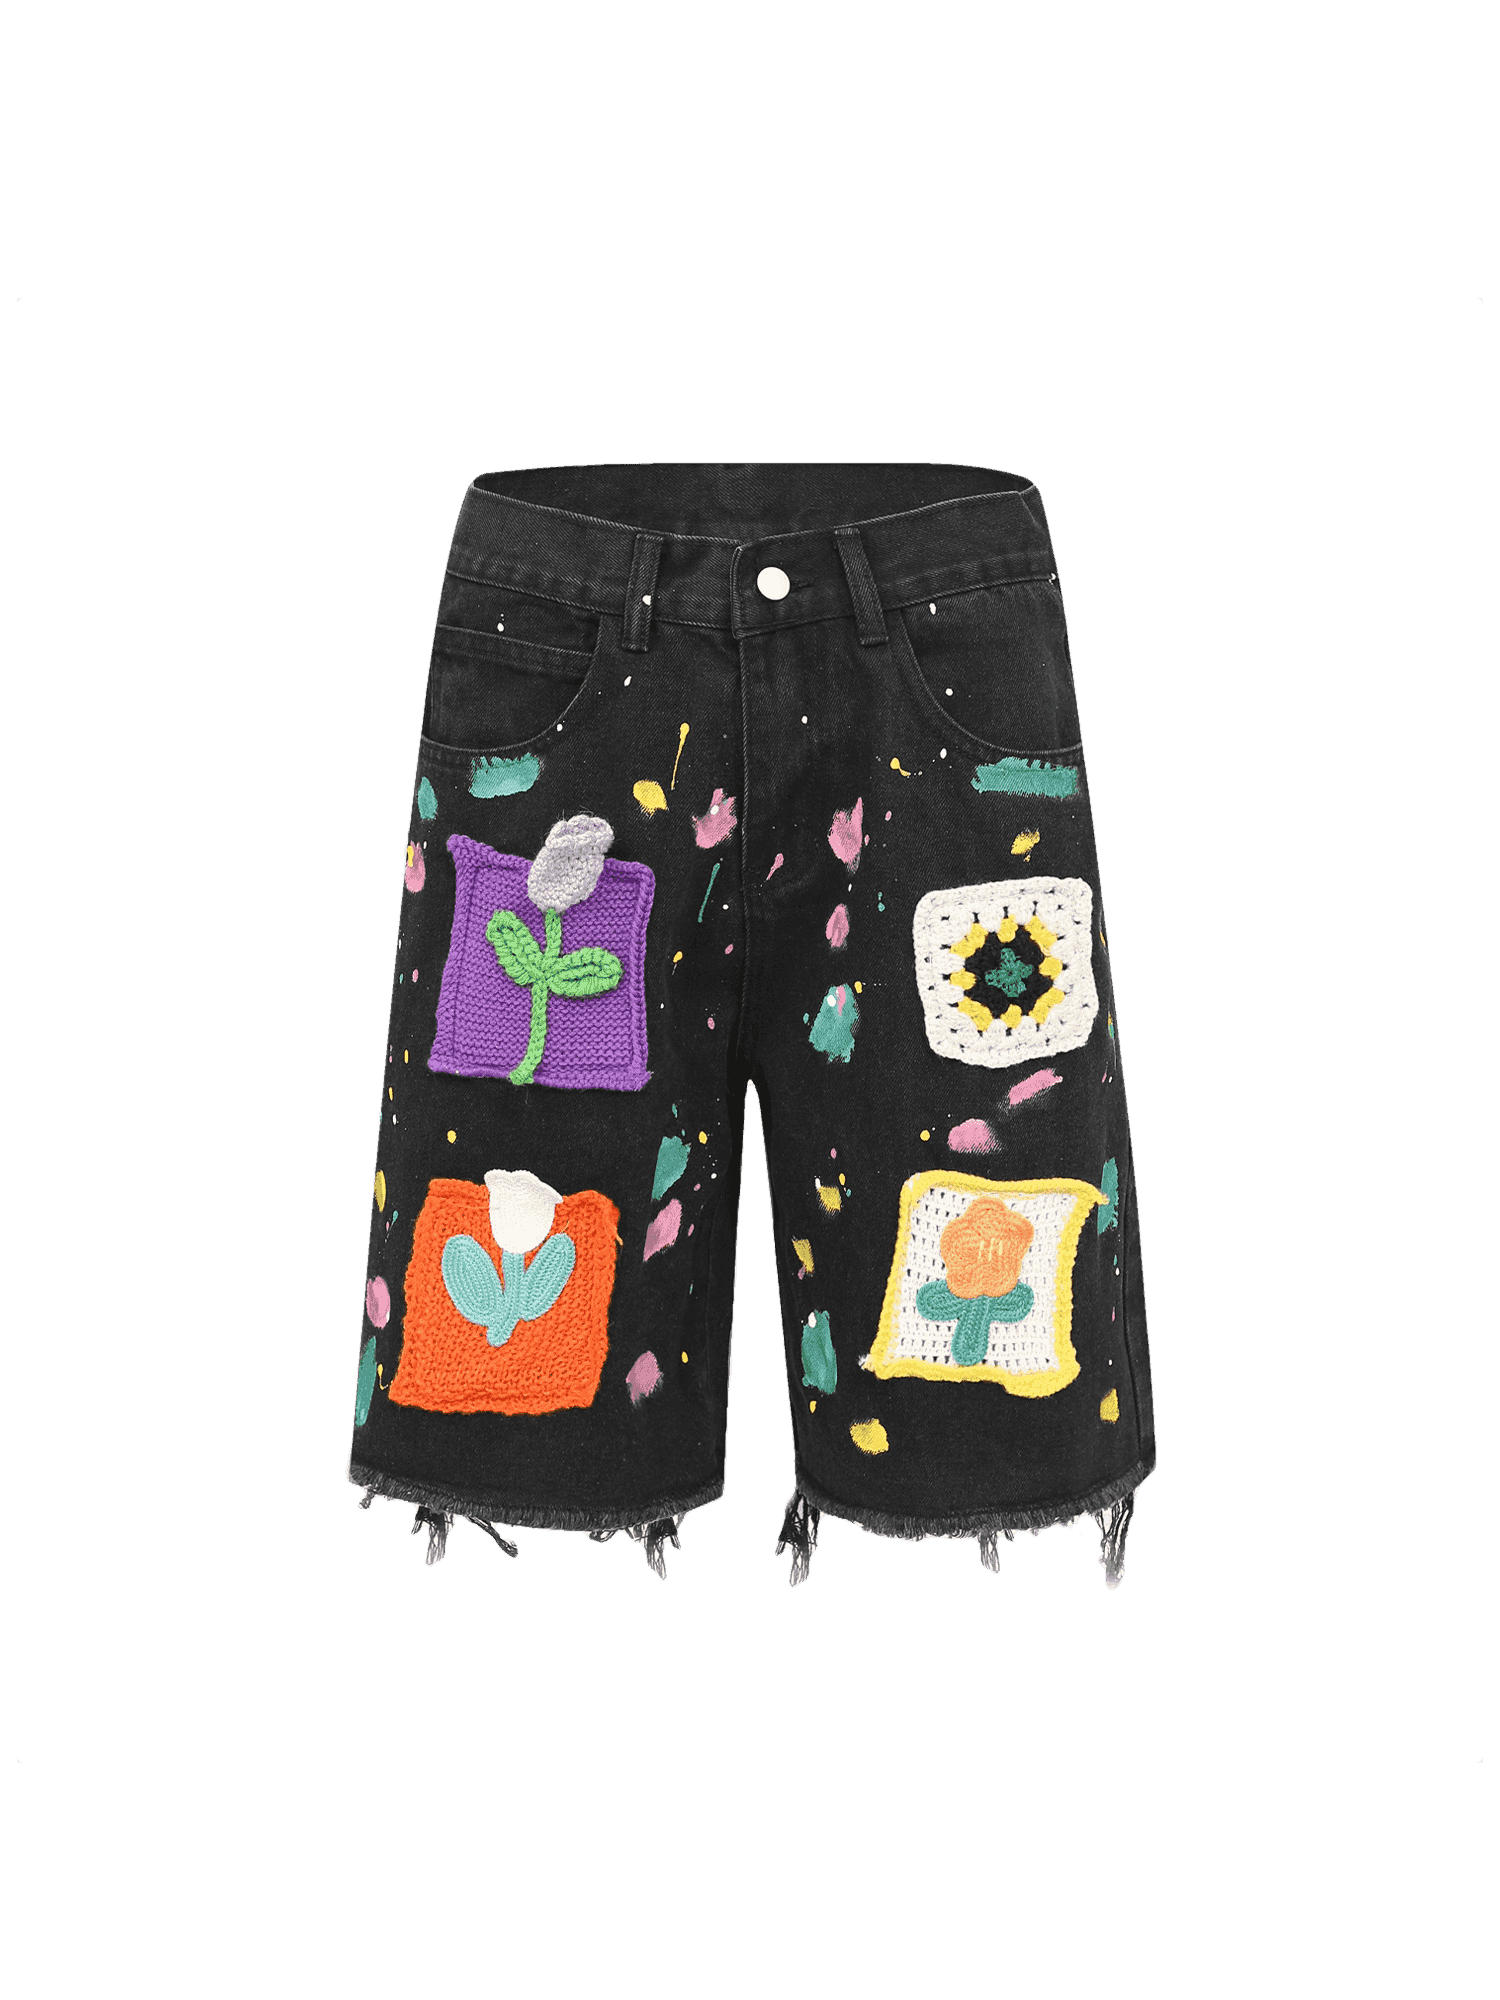 American Street Patch Flower Embroidered Cat Whiskers Denim Shorts- 2032